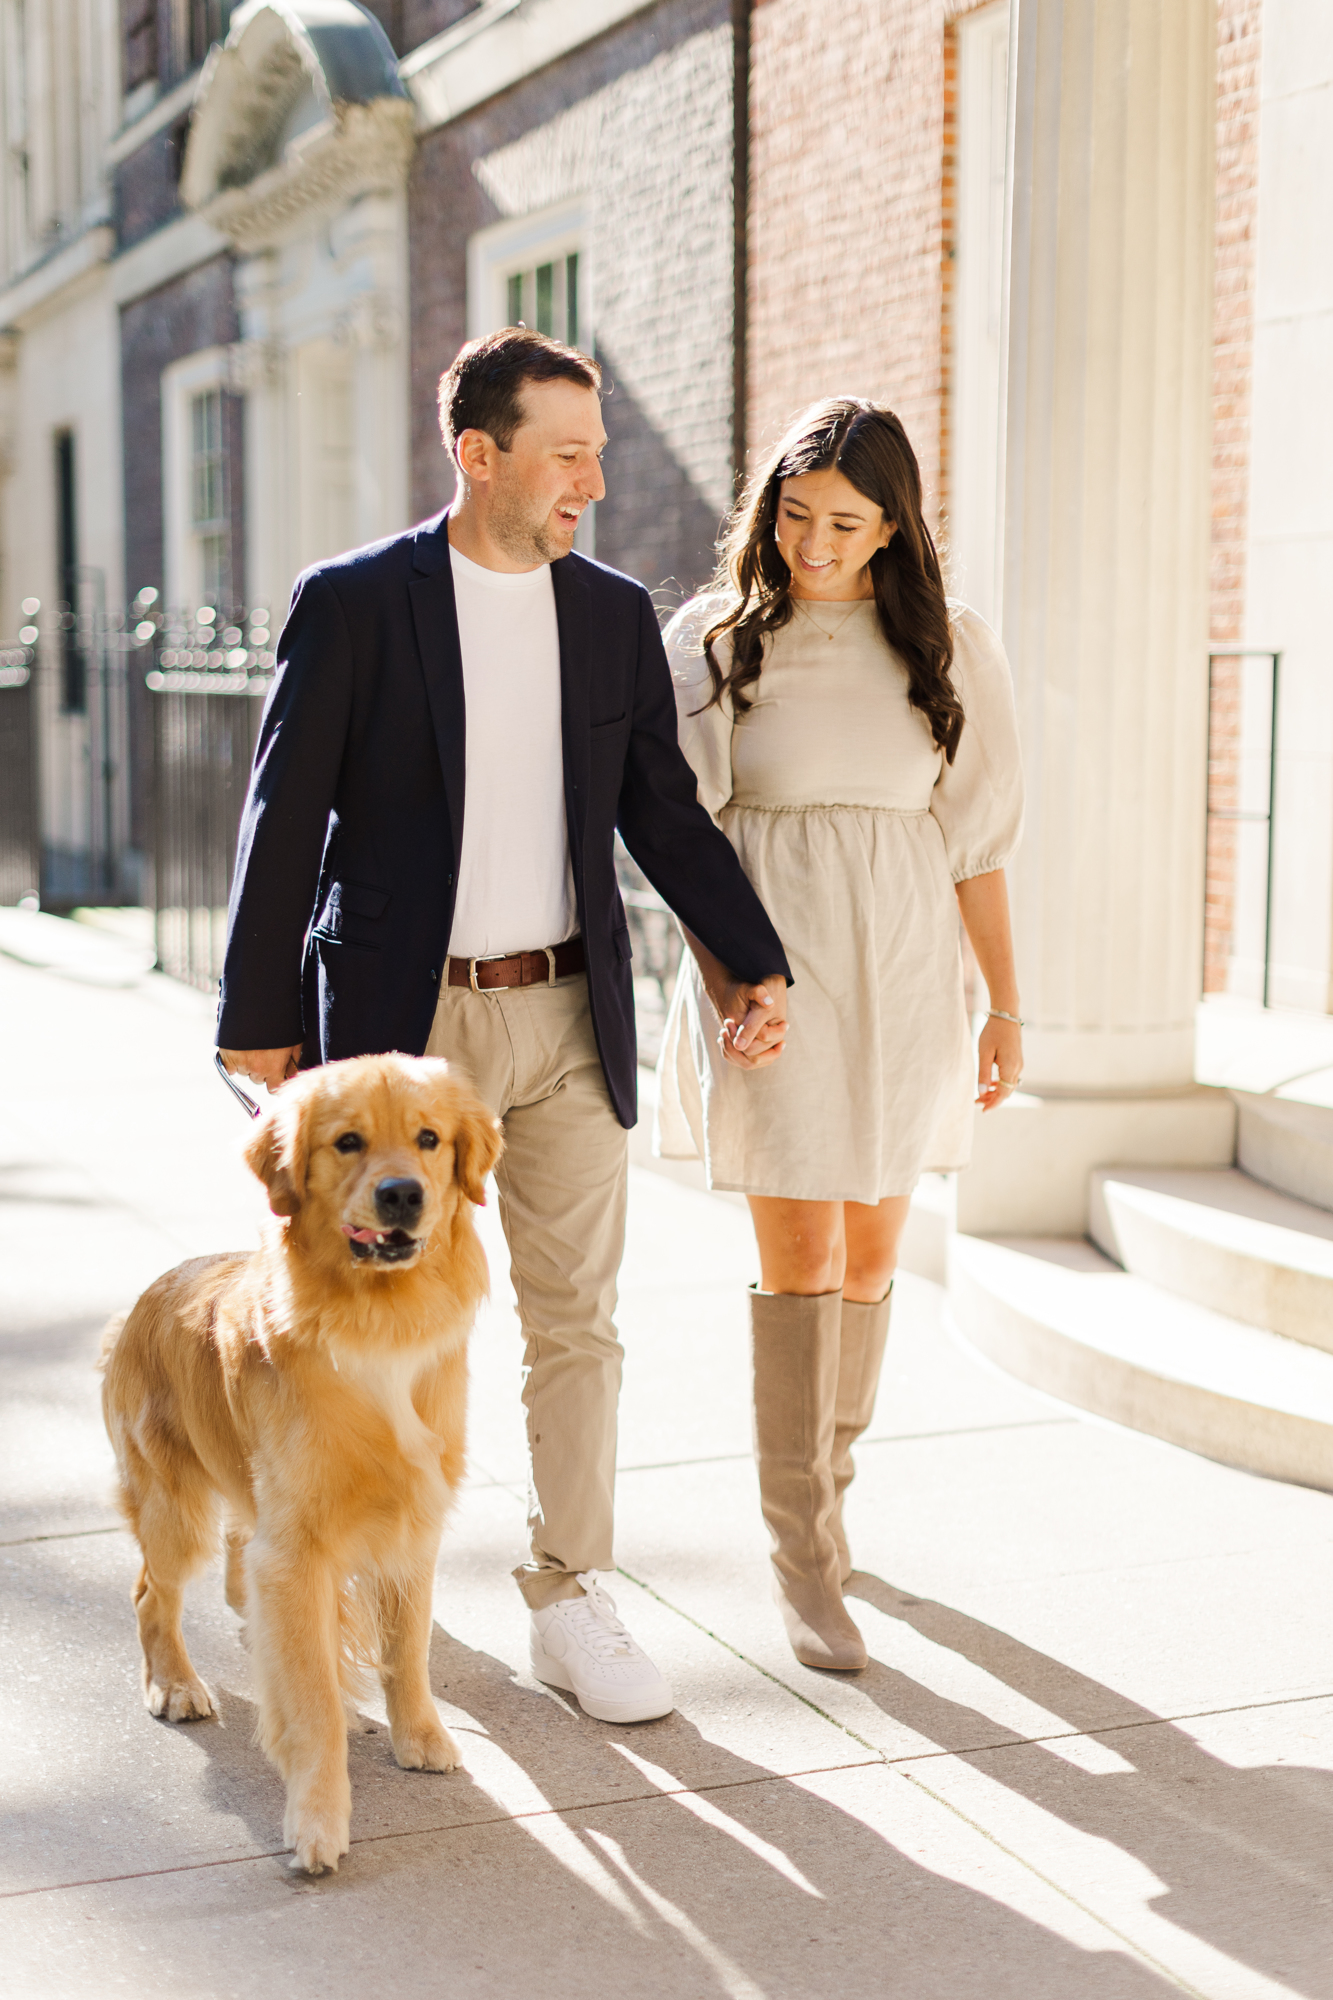 Playful Engagement Photos In Upper East Side